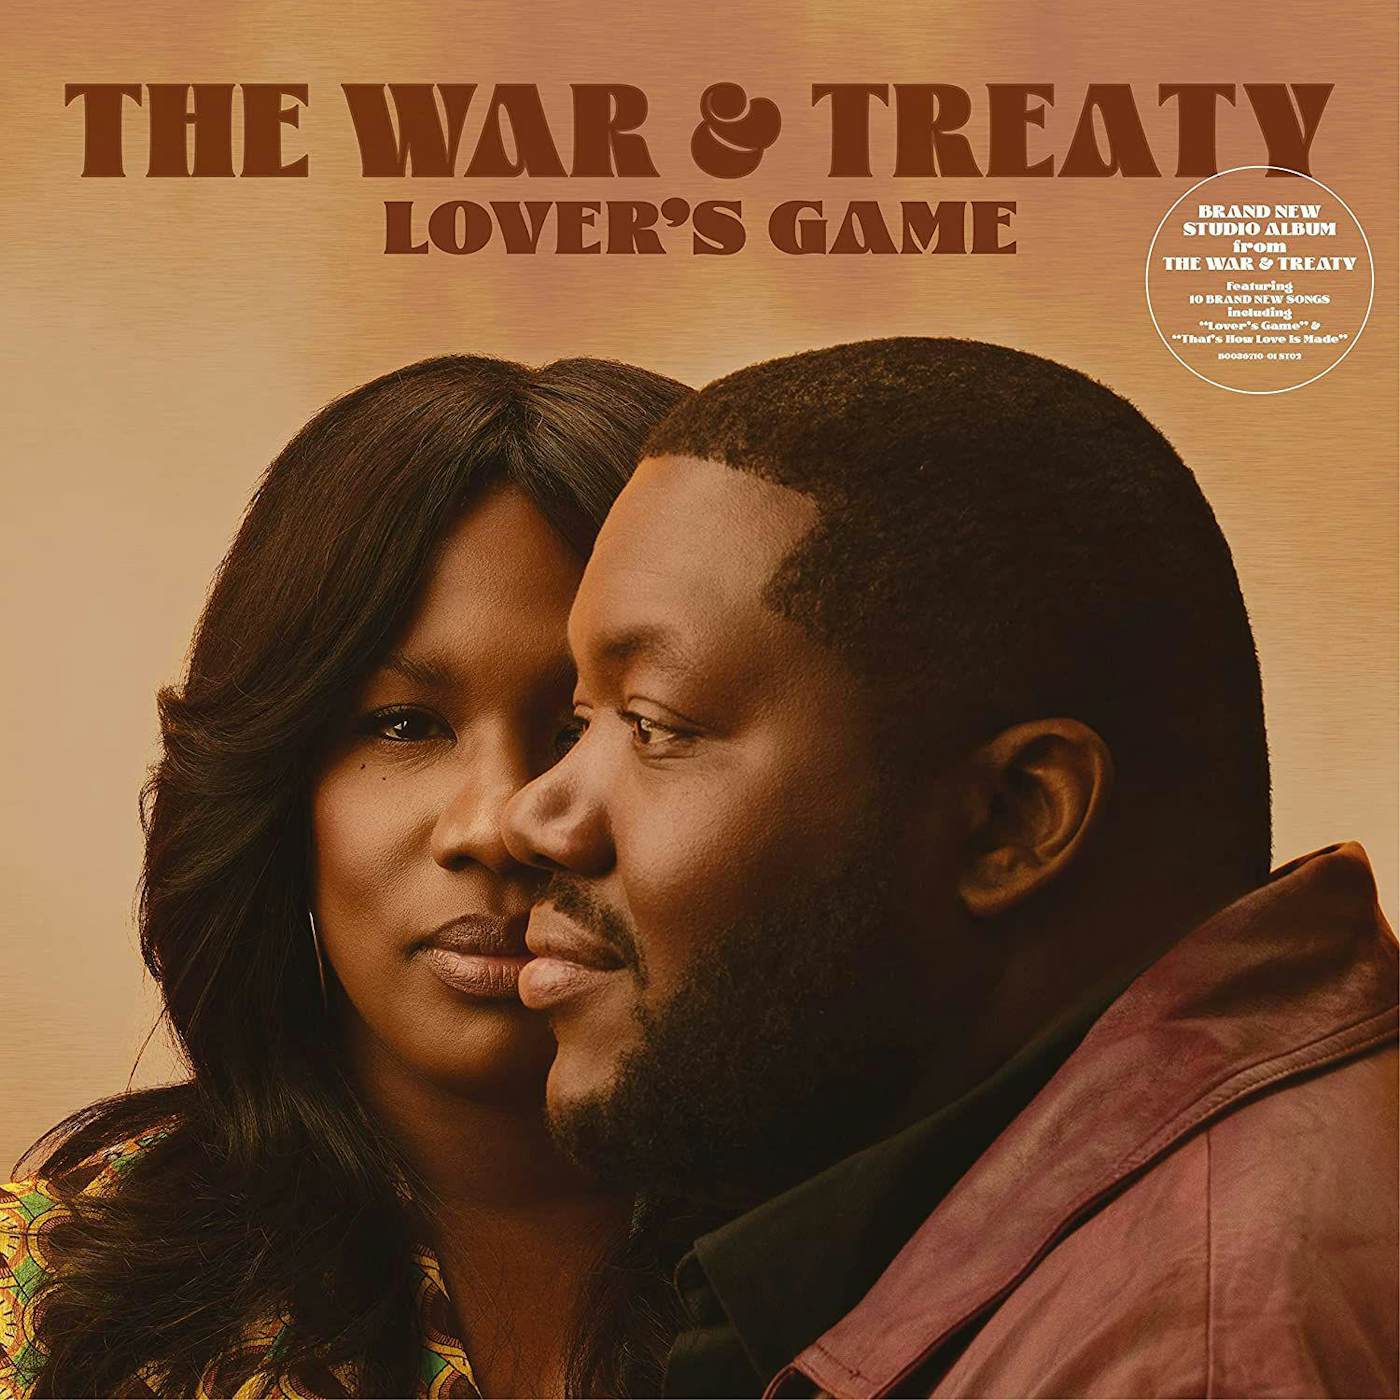 The War and Treaty Lover's Game Vinyl Record